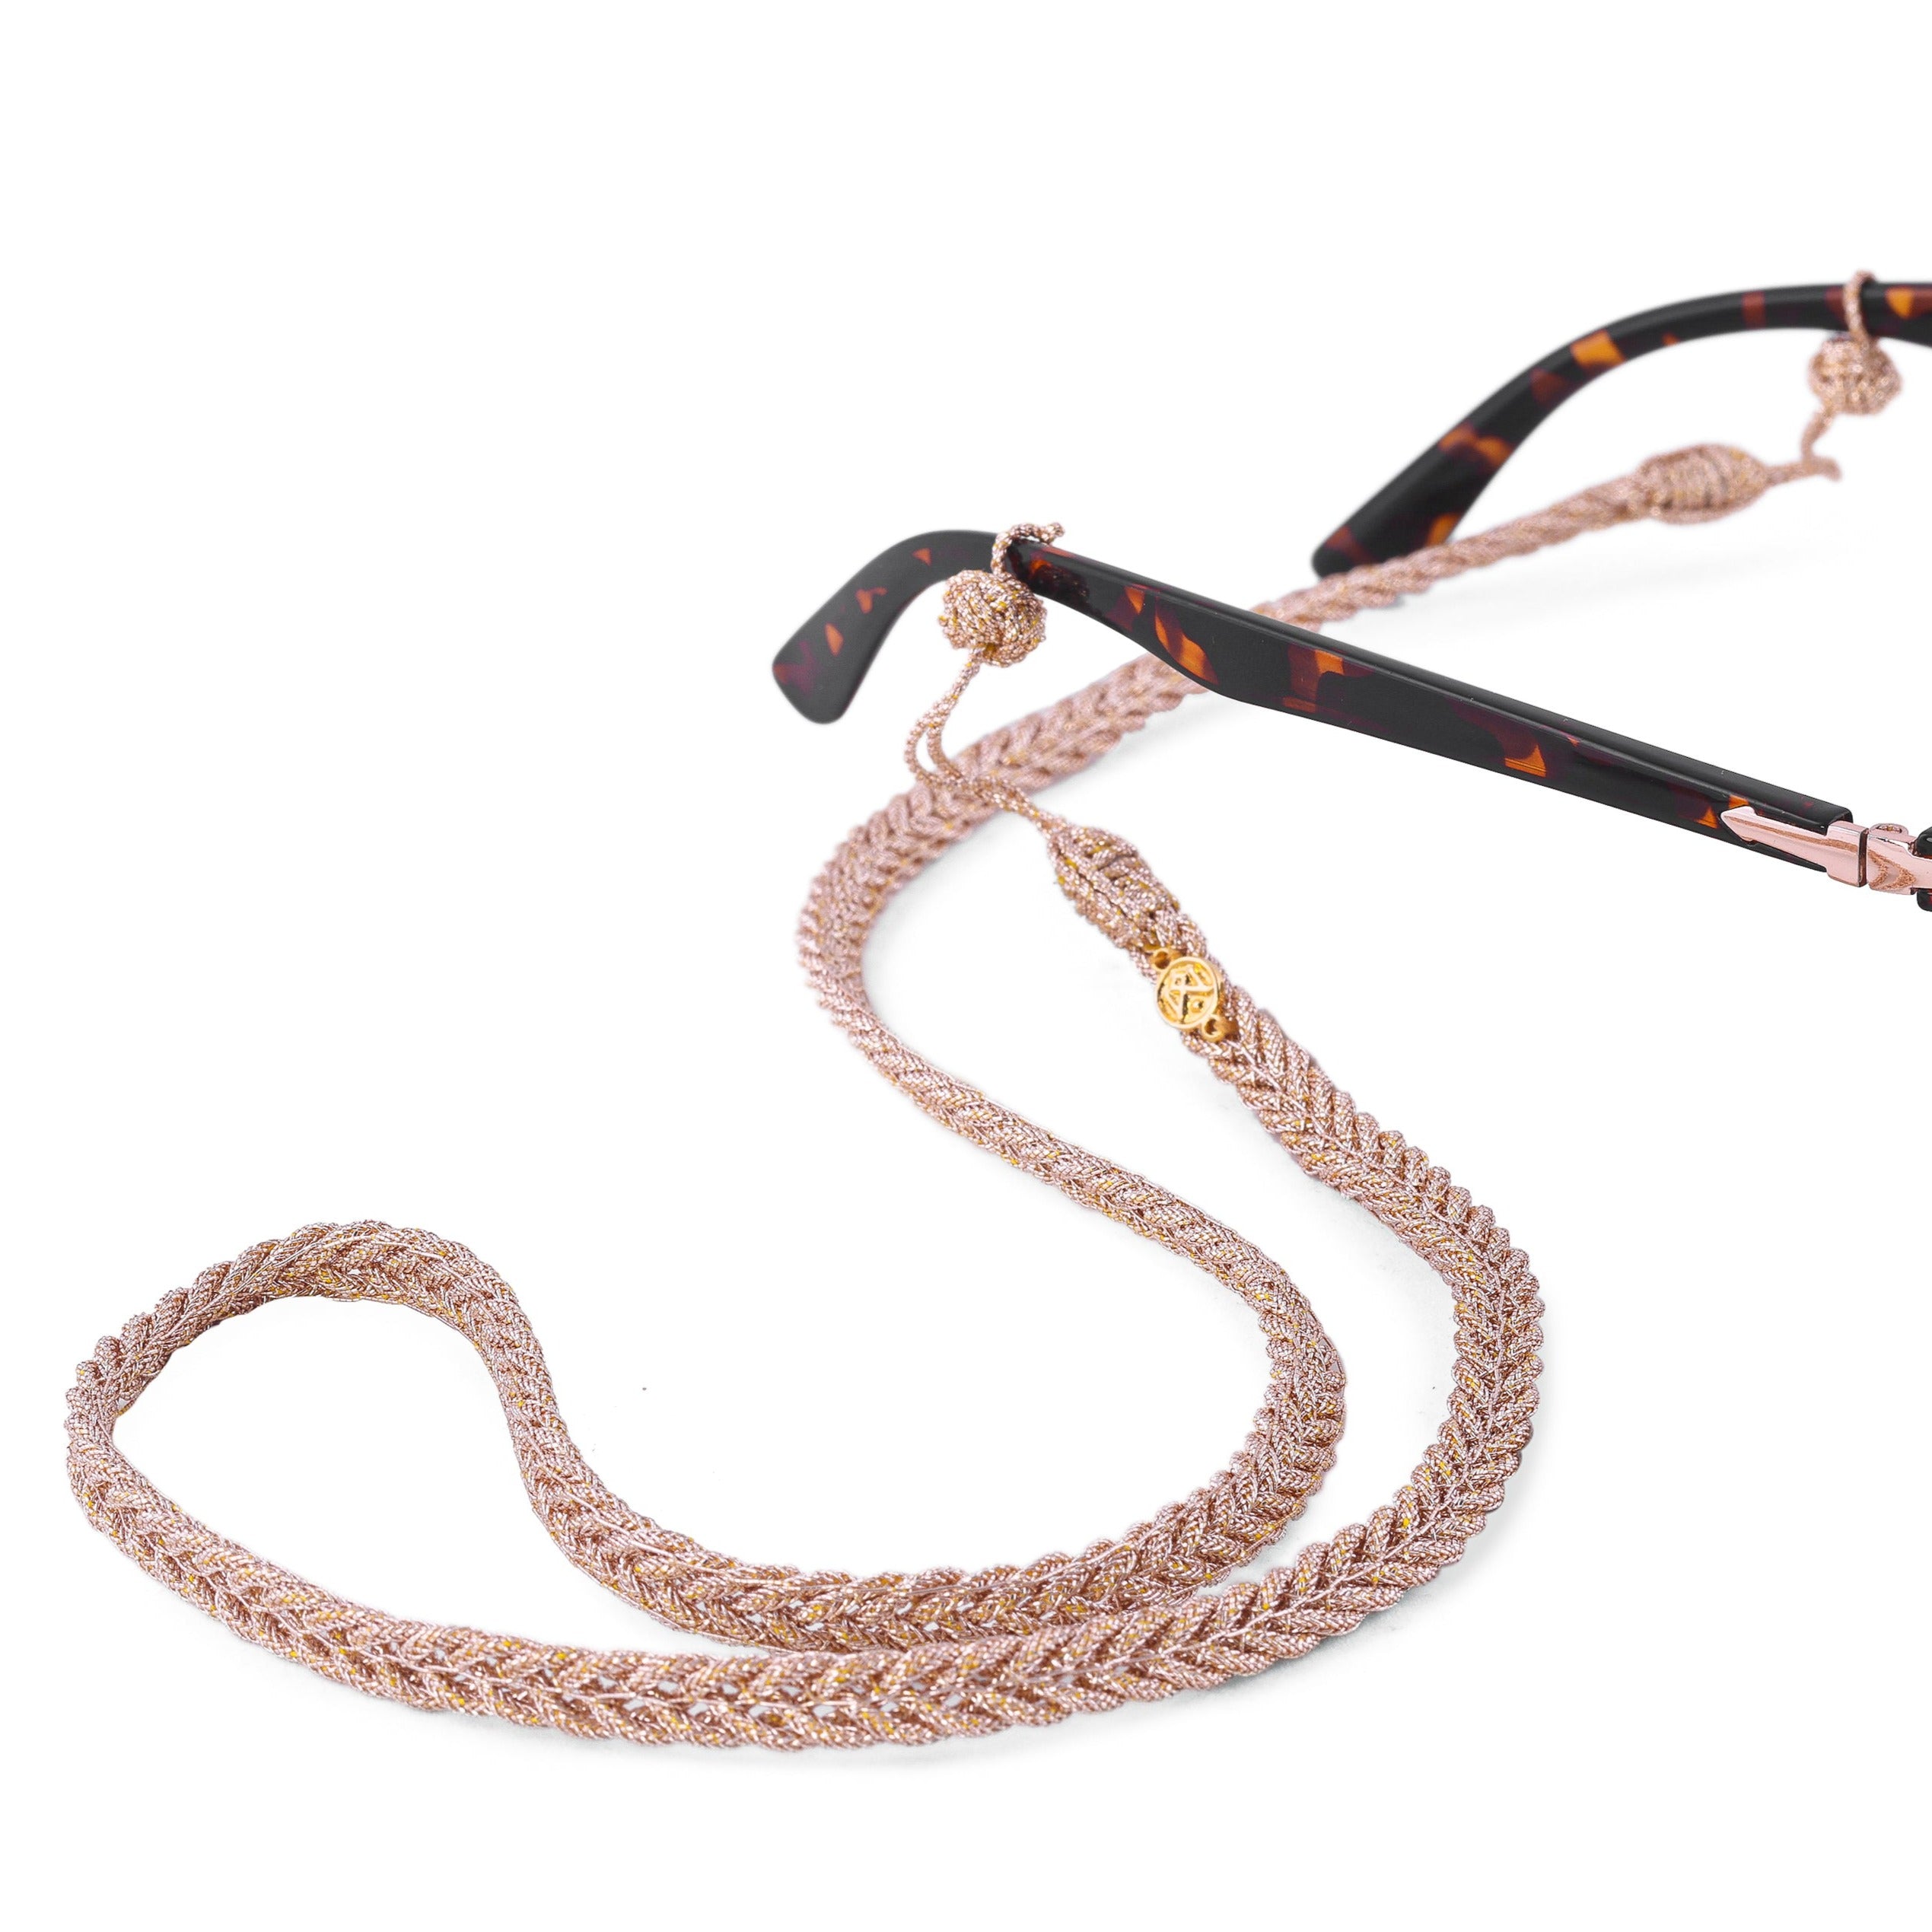 Braided Glasses Strap in Rose Gold